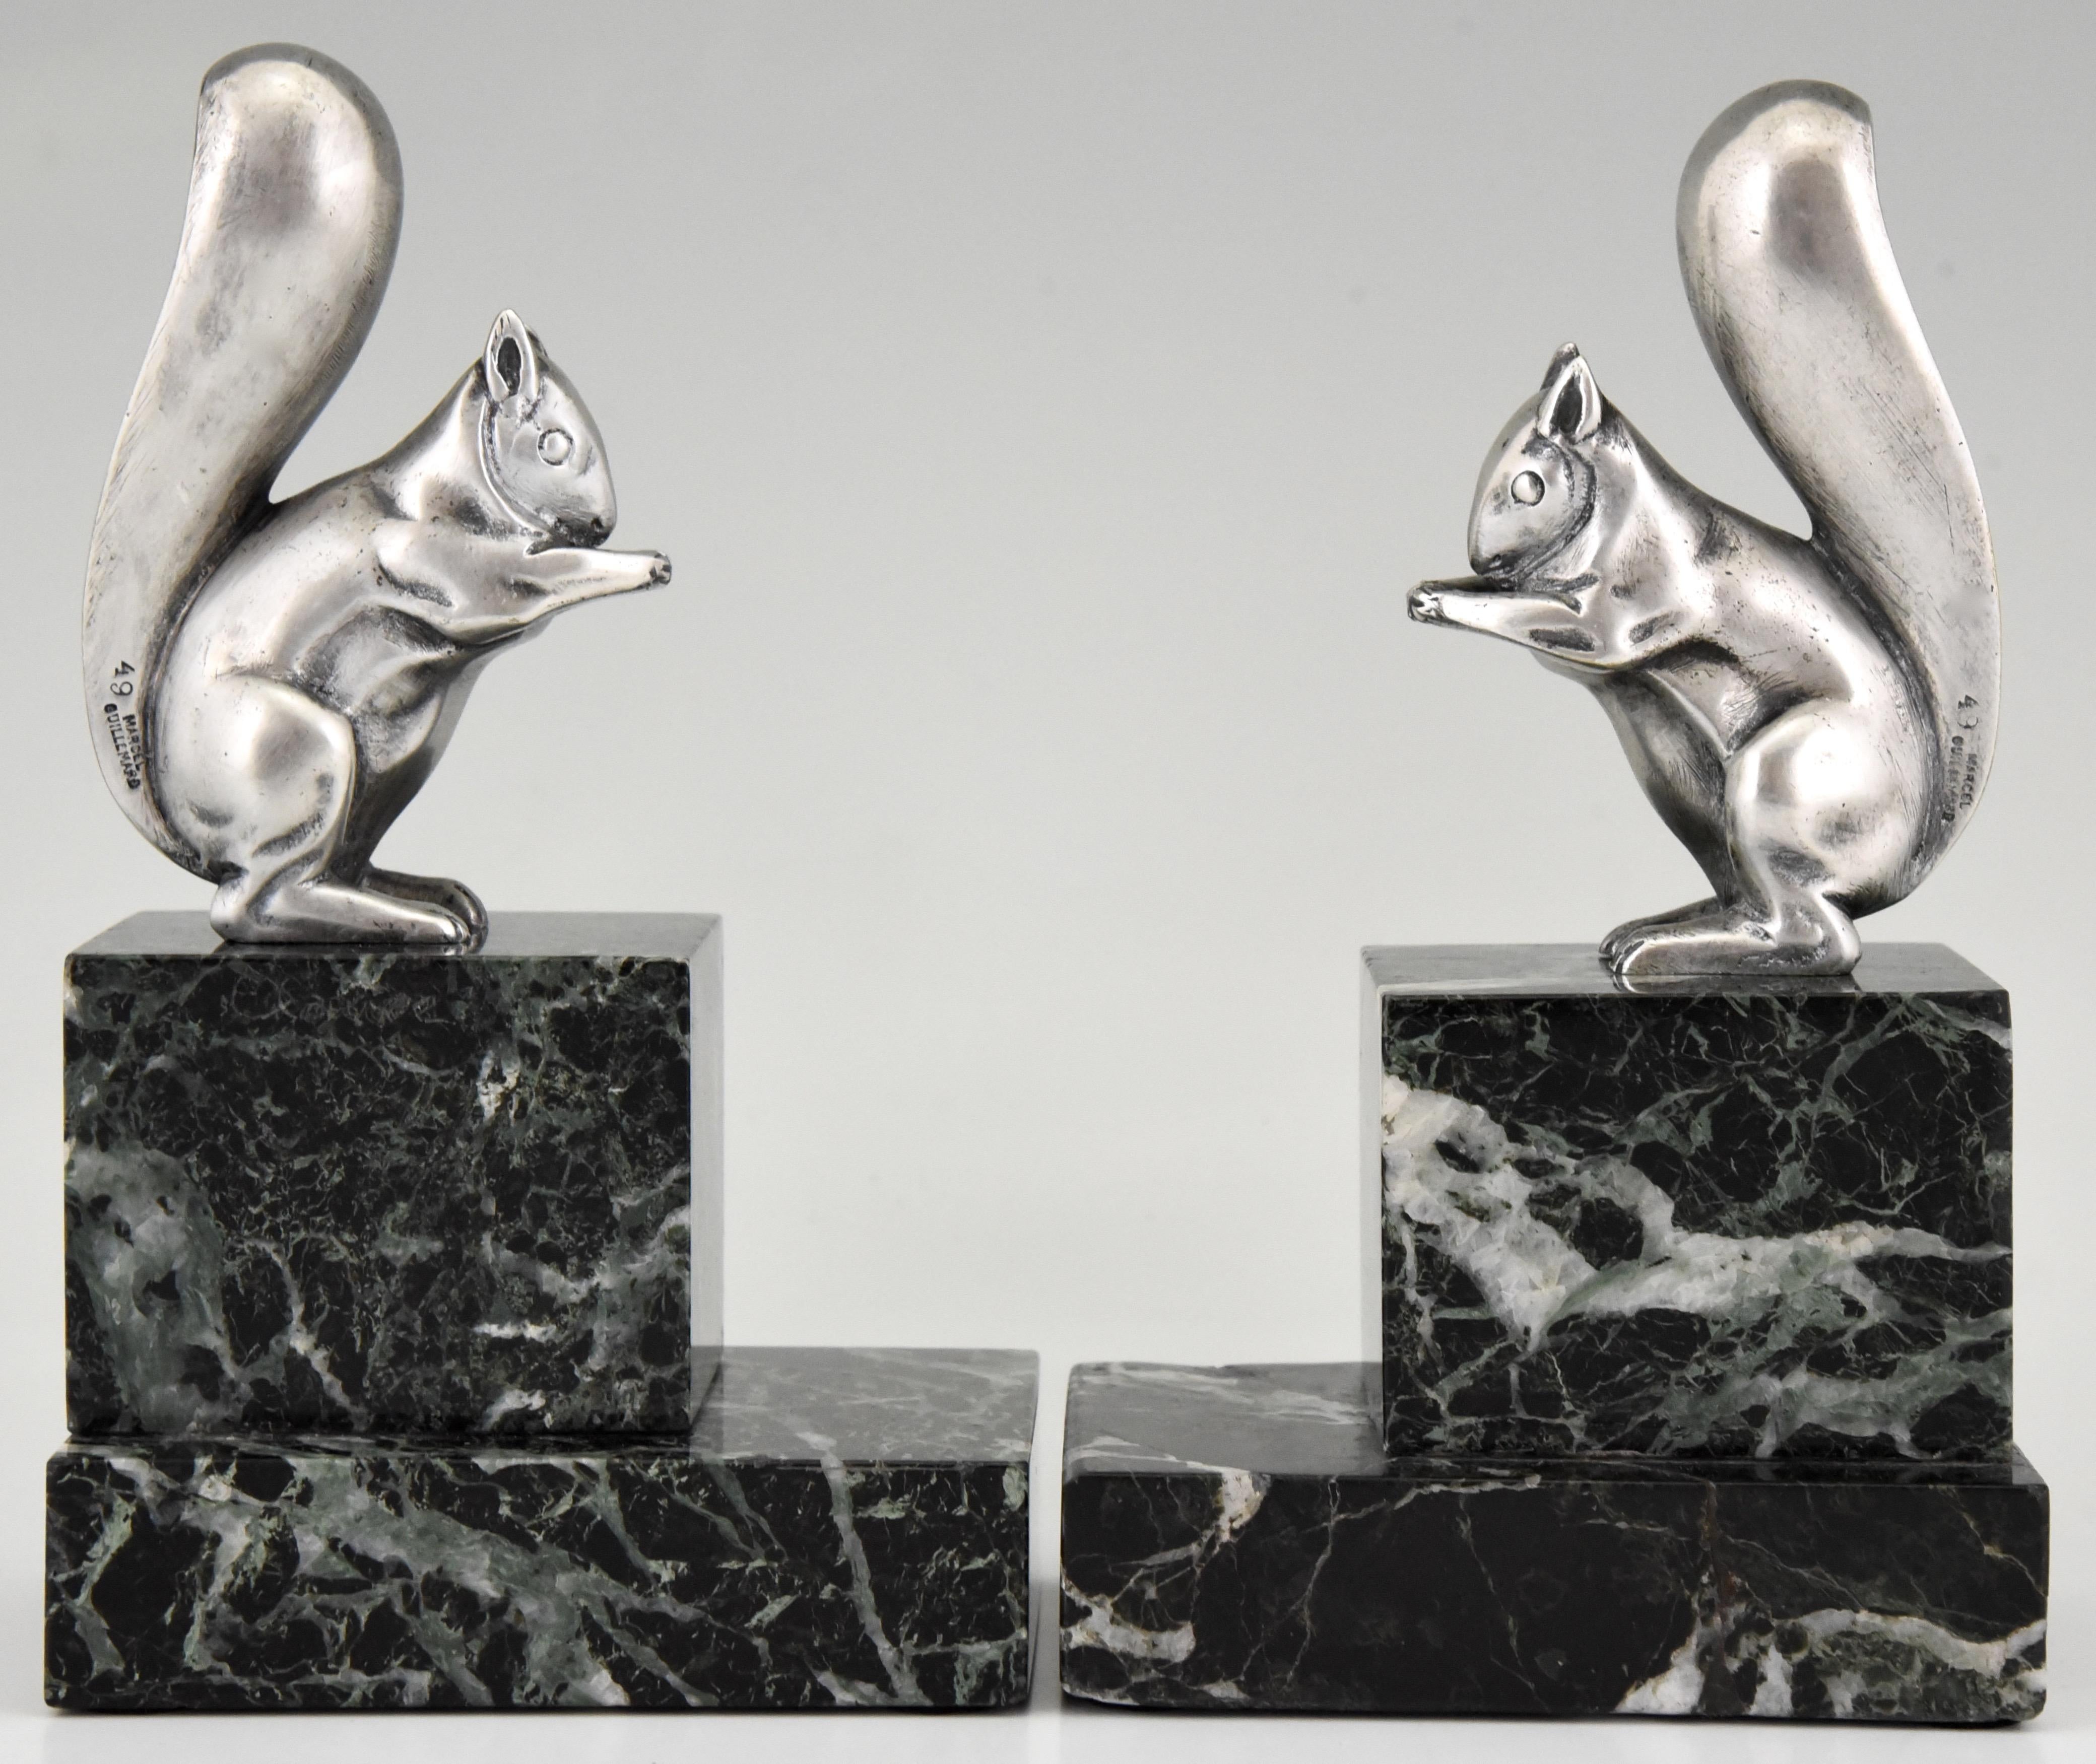 Cute pair of silvered bronze Art Deco bookends in the shape of squirrels. Signed by the French artist Claude and with the founders' signature of Marcel Guillemard. Mounted on marble bases, France, 1930.

“Dictionnaire illustré des sculpteurs